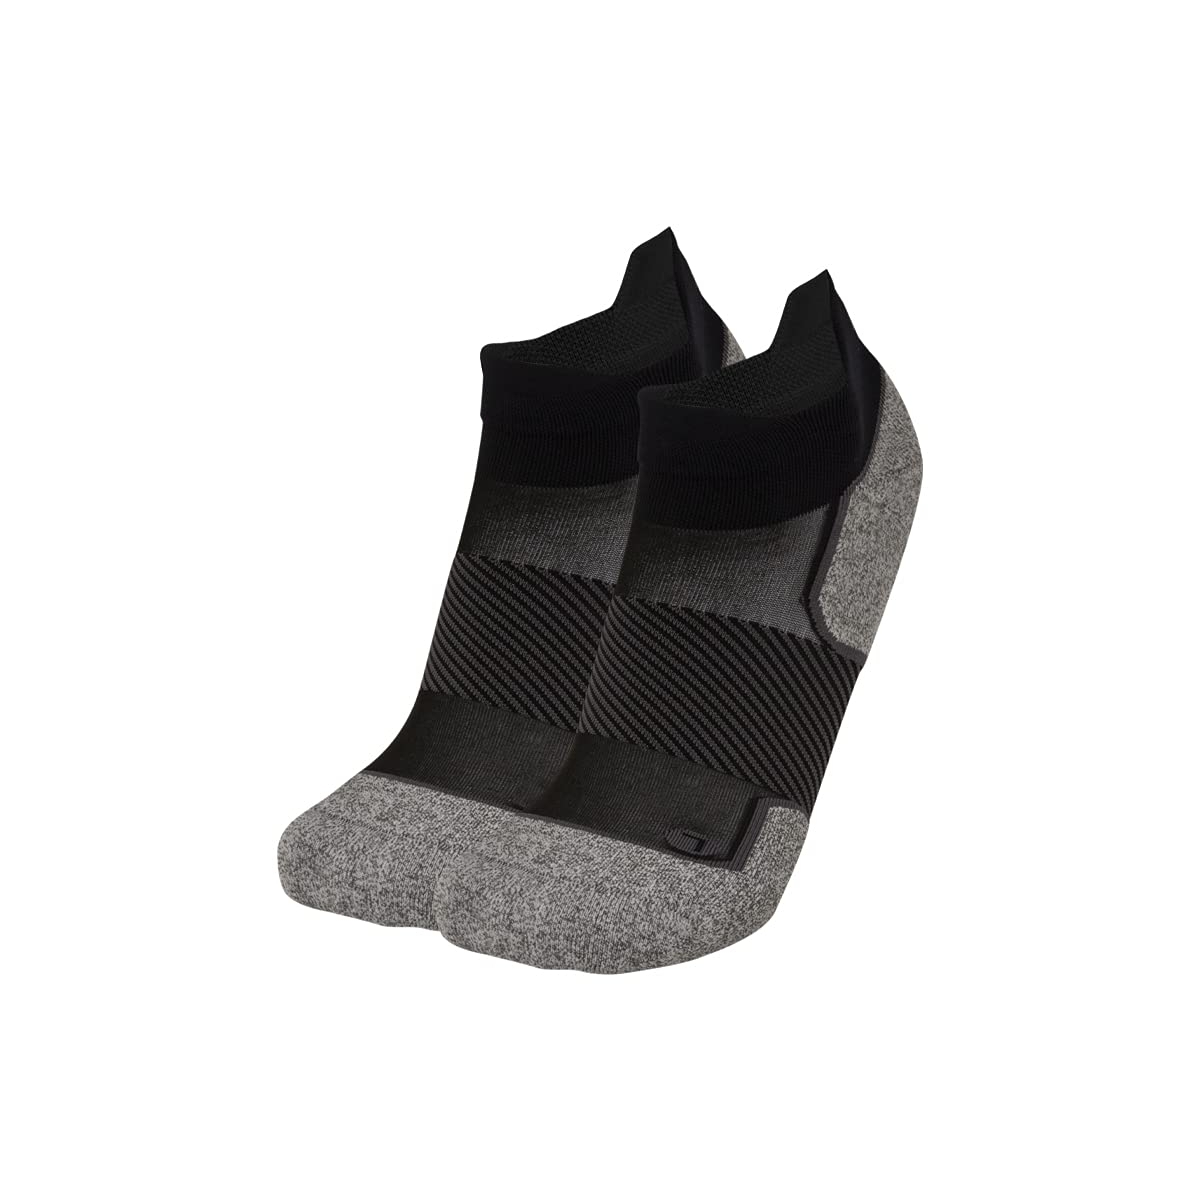 OS1st AC4 Blister Protection Double-tab Active Comfort Socks - BLACK, Large